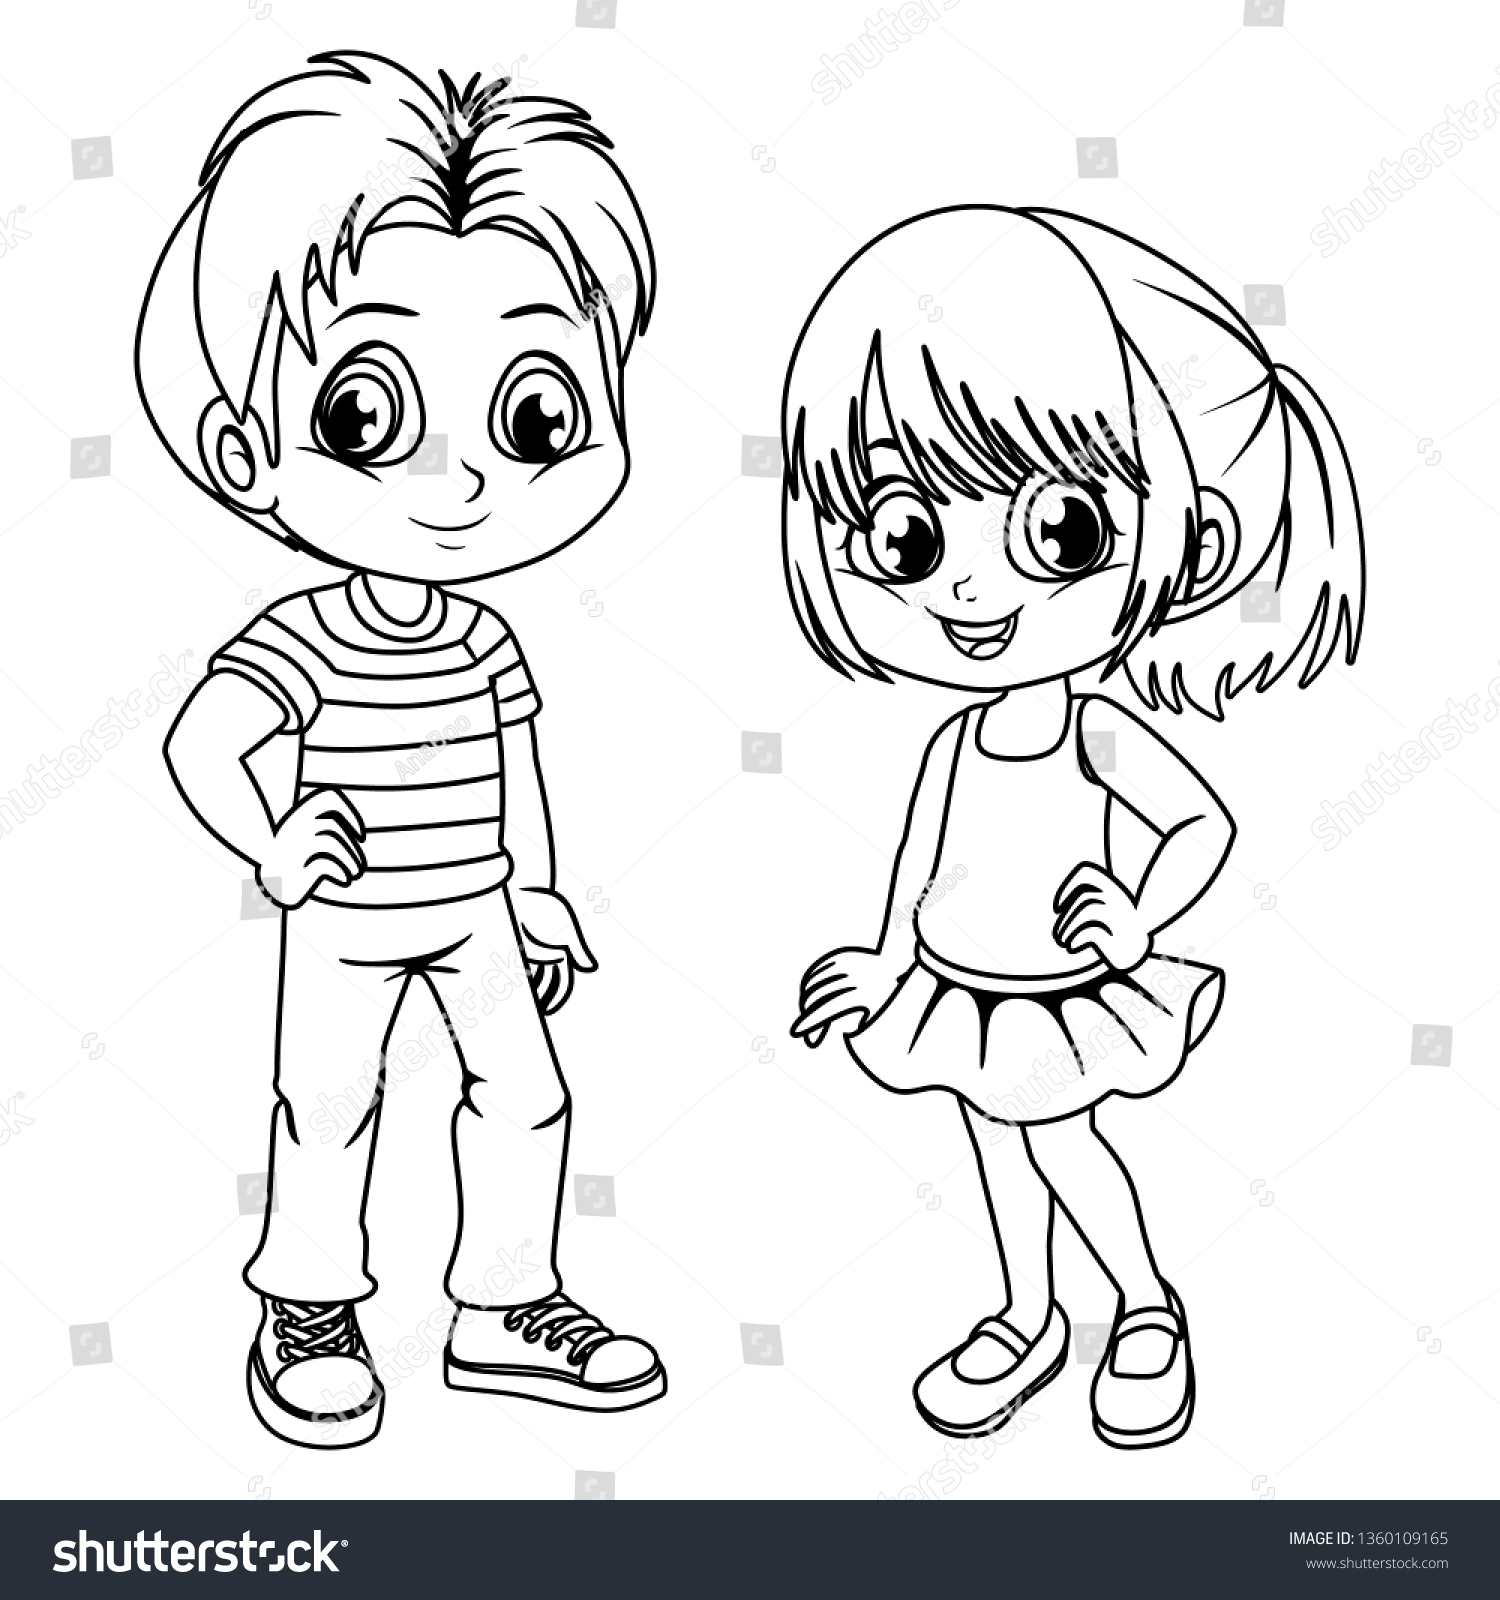 Coloring Pages Cute Cartoon Boy Girl Stock Vector Royalty Free ...